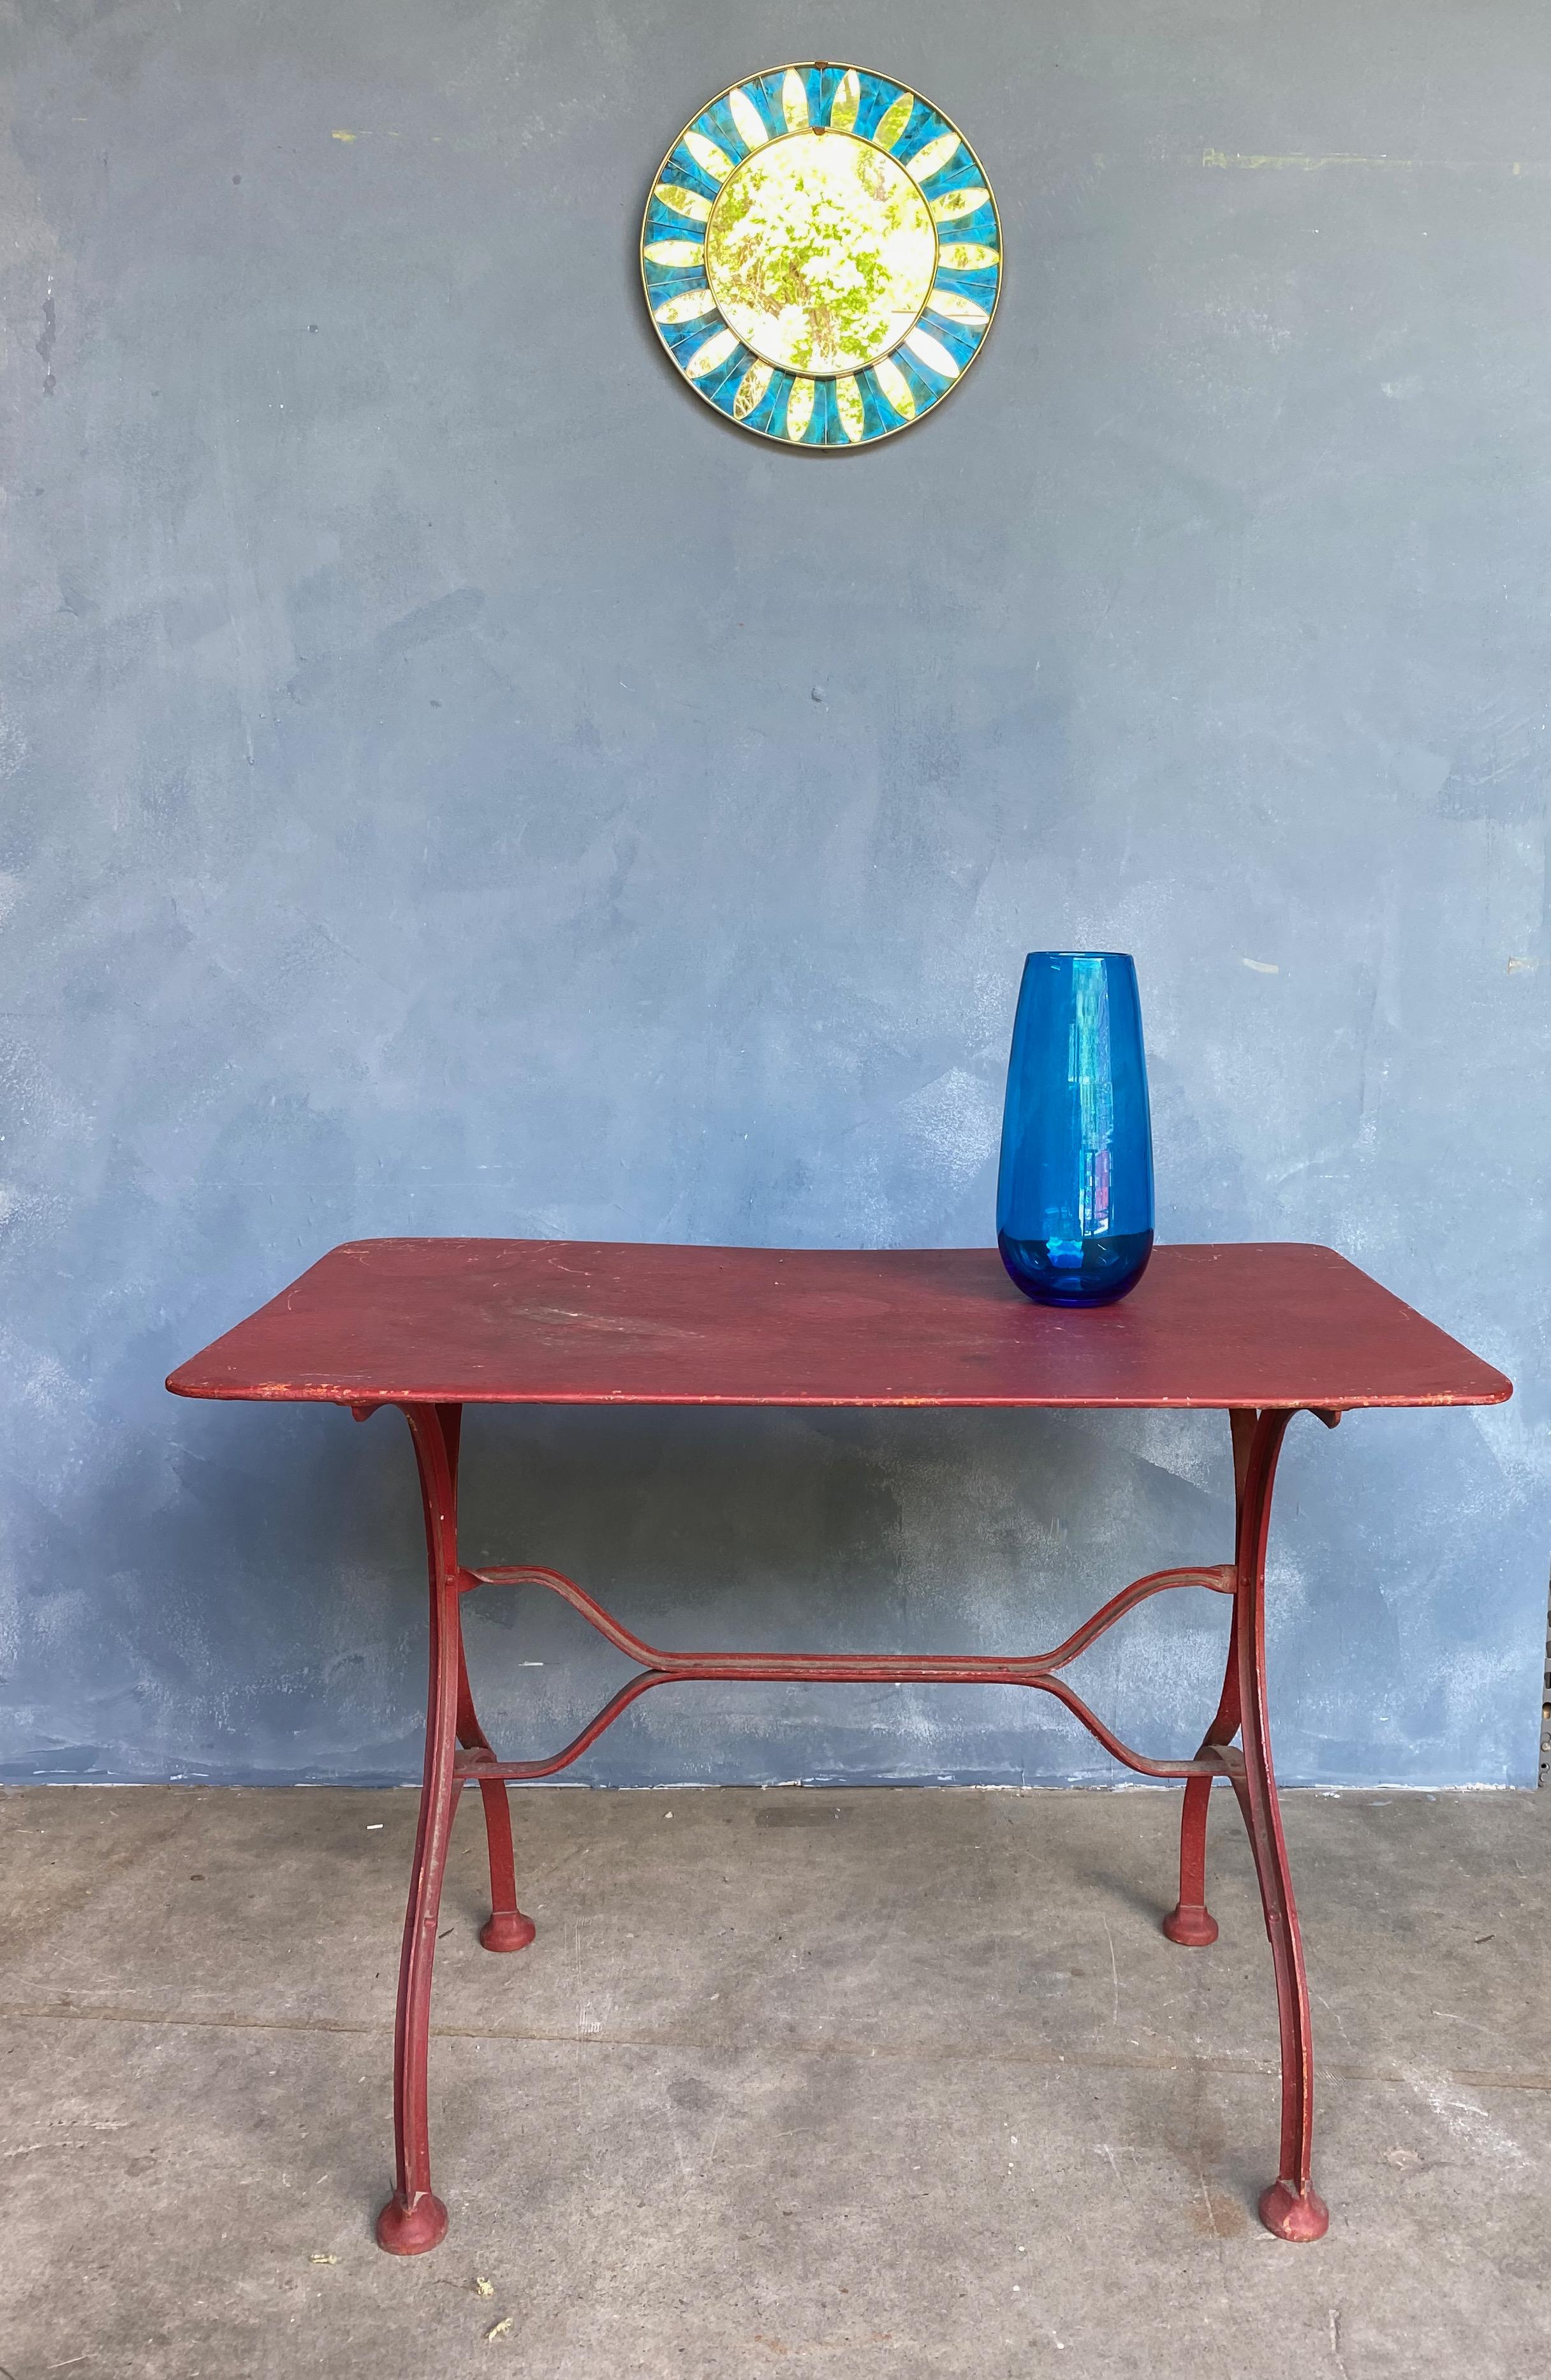 This red painted French iron garden table will add a pop of color and vintage charm to any outdoor space. The classic French bistro style of the iron base and the solid metal top are a nod to the industrial design of 1920s France. Painted in a